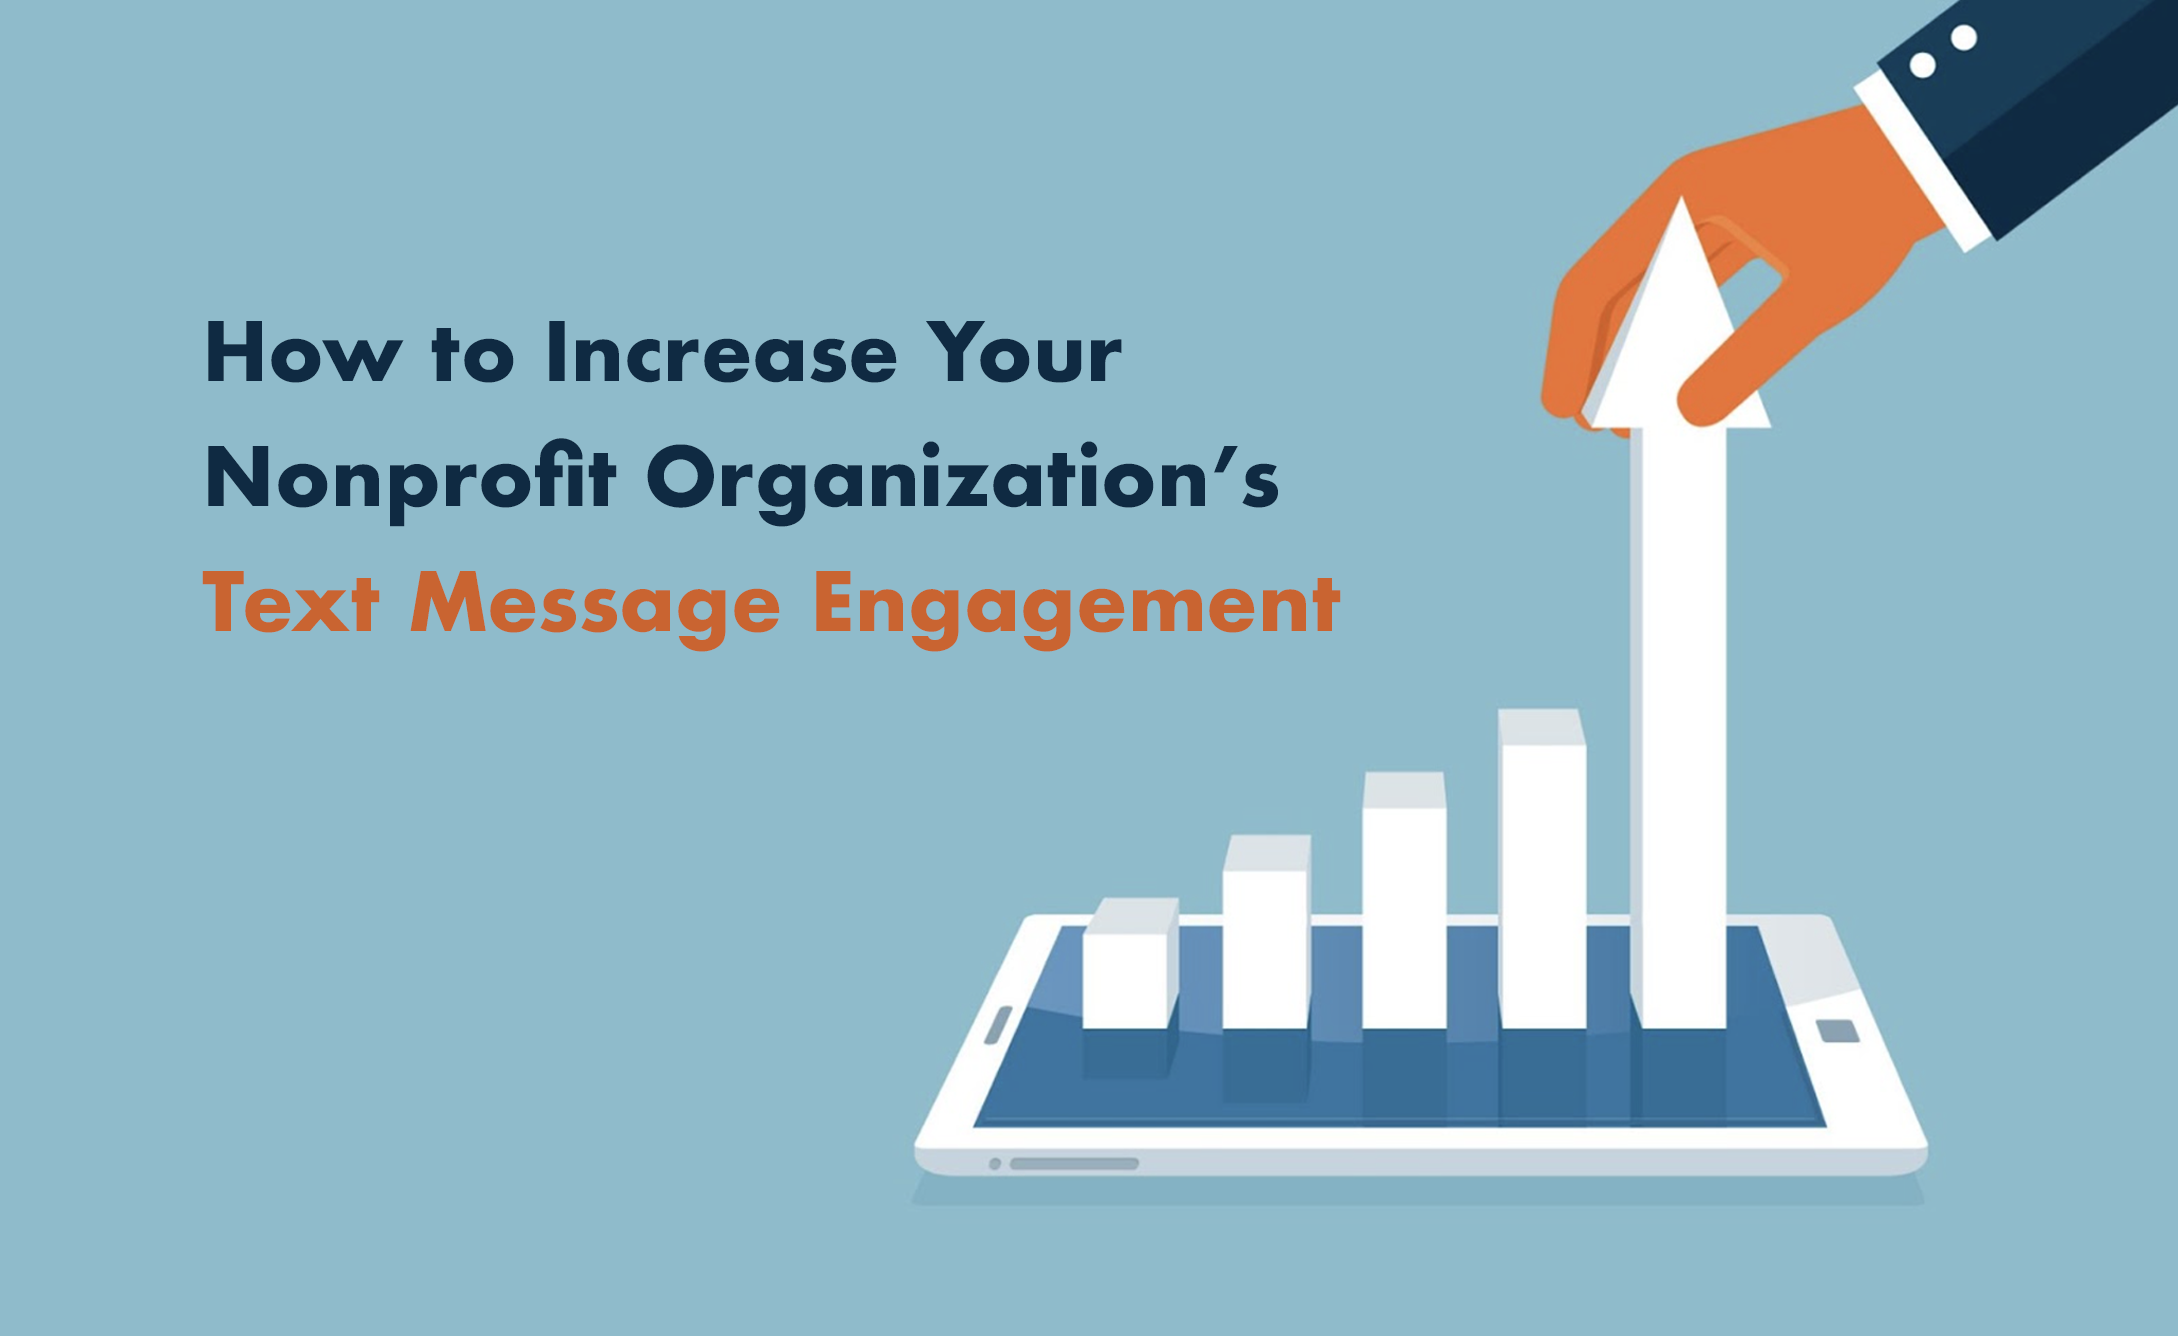 How to Increase Your Nonprofit Organization’s Text Message Engagement